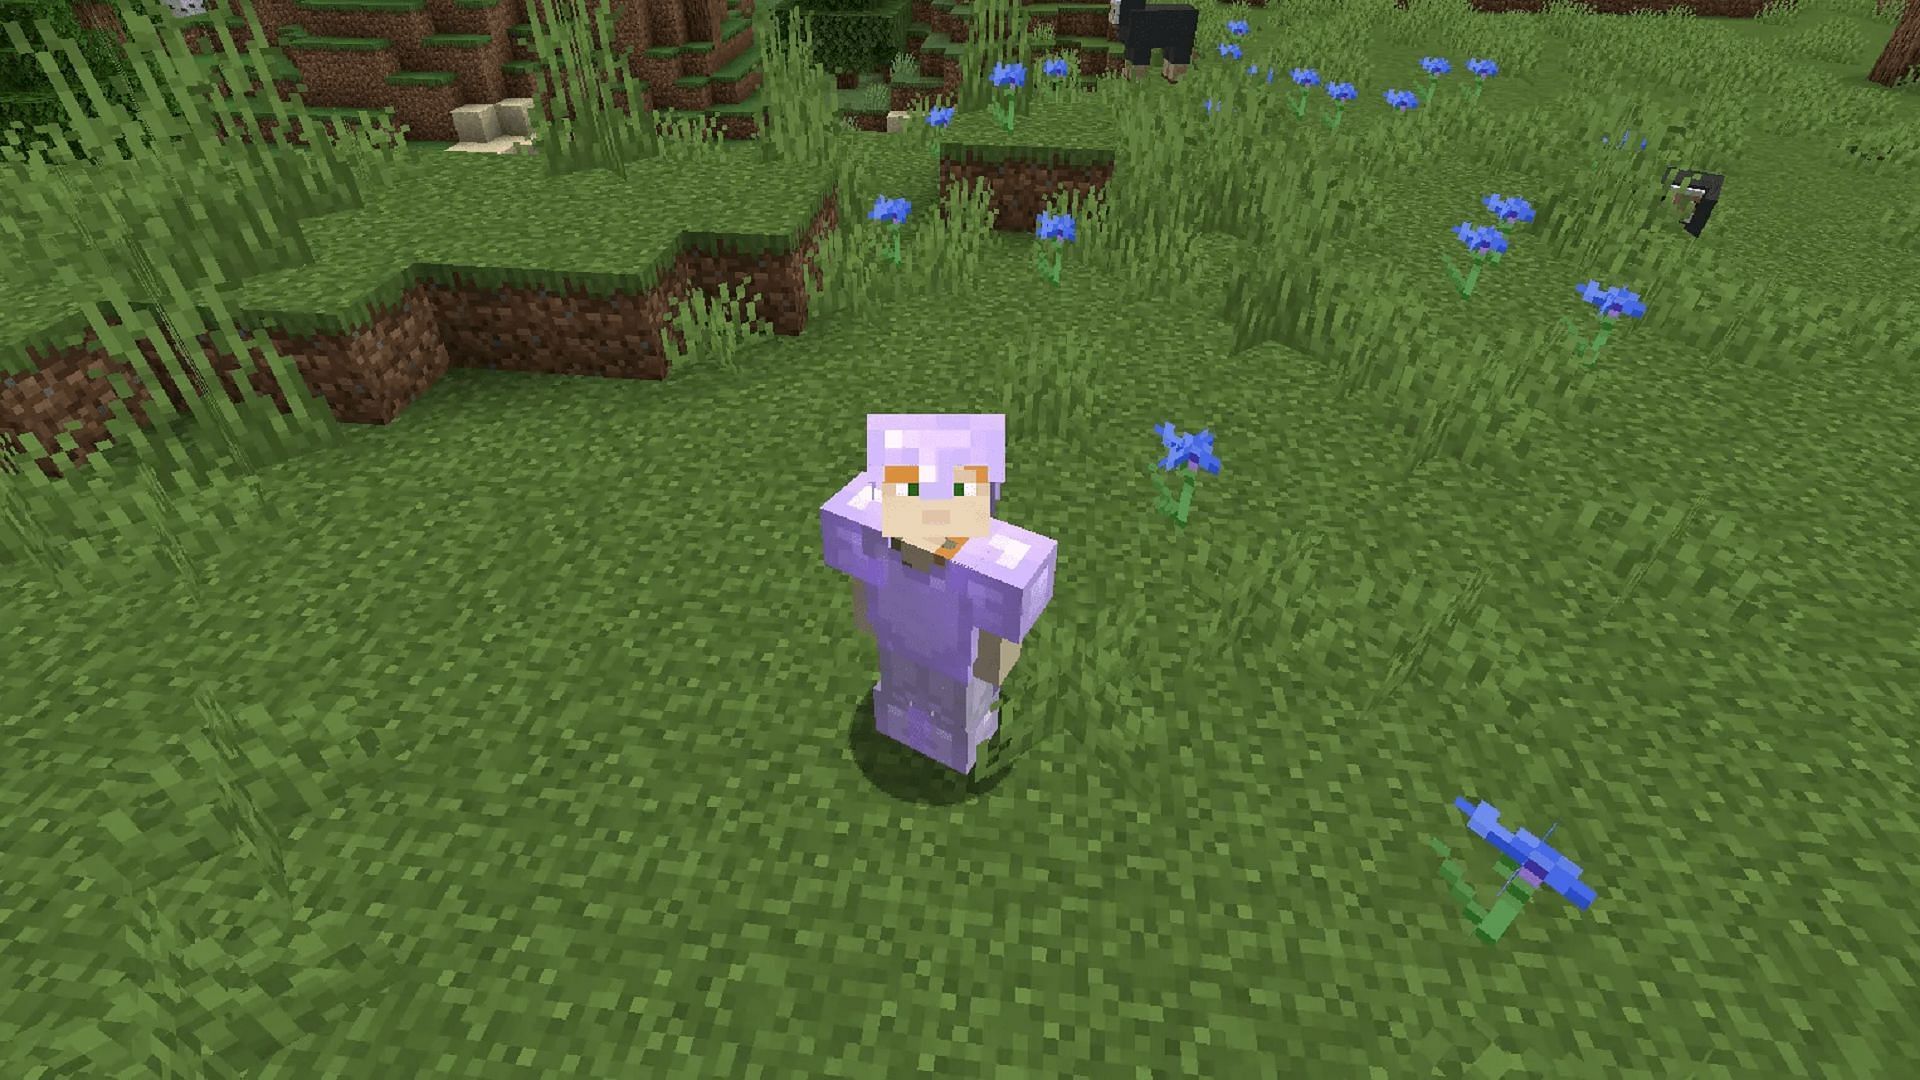 A player in enchanted iron armor in the game (Image via Mojang)